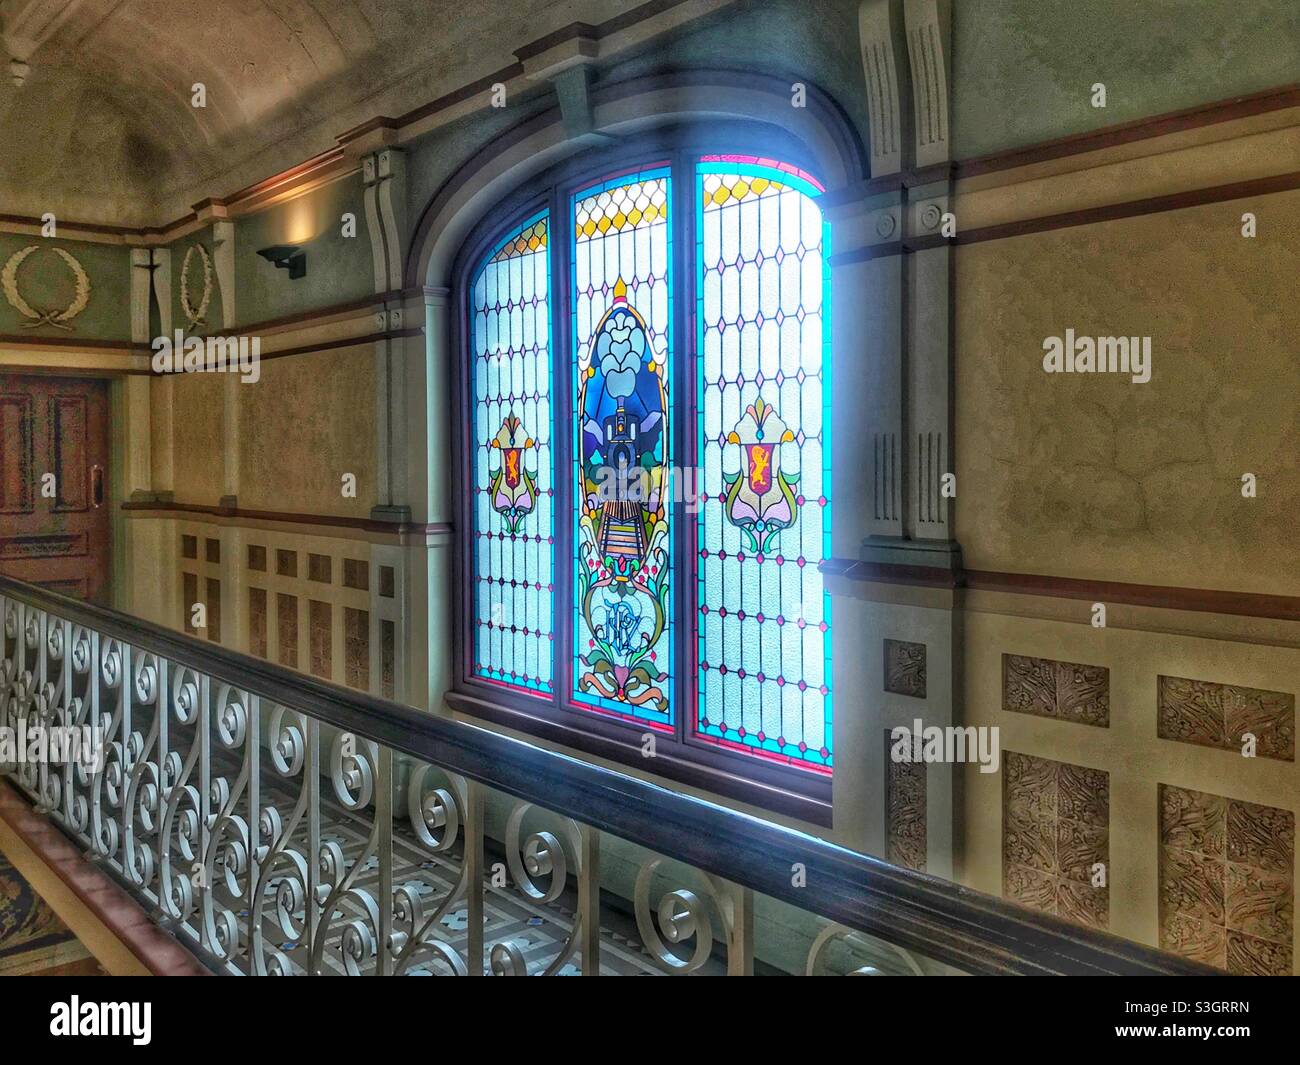 Stained glass window at the train station in Dunedin, Otago region, South Island, New Zealand Stock Photo